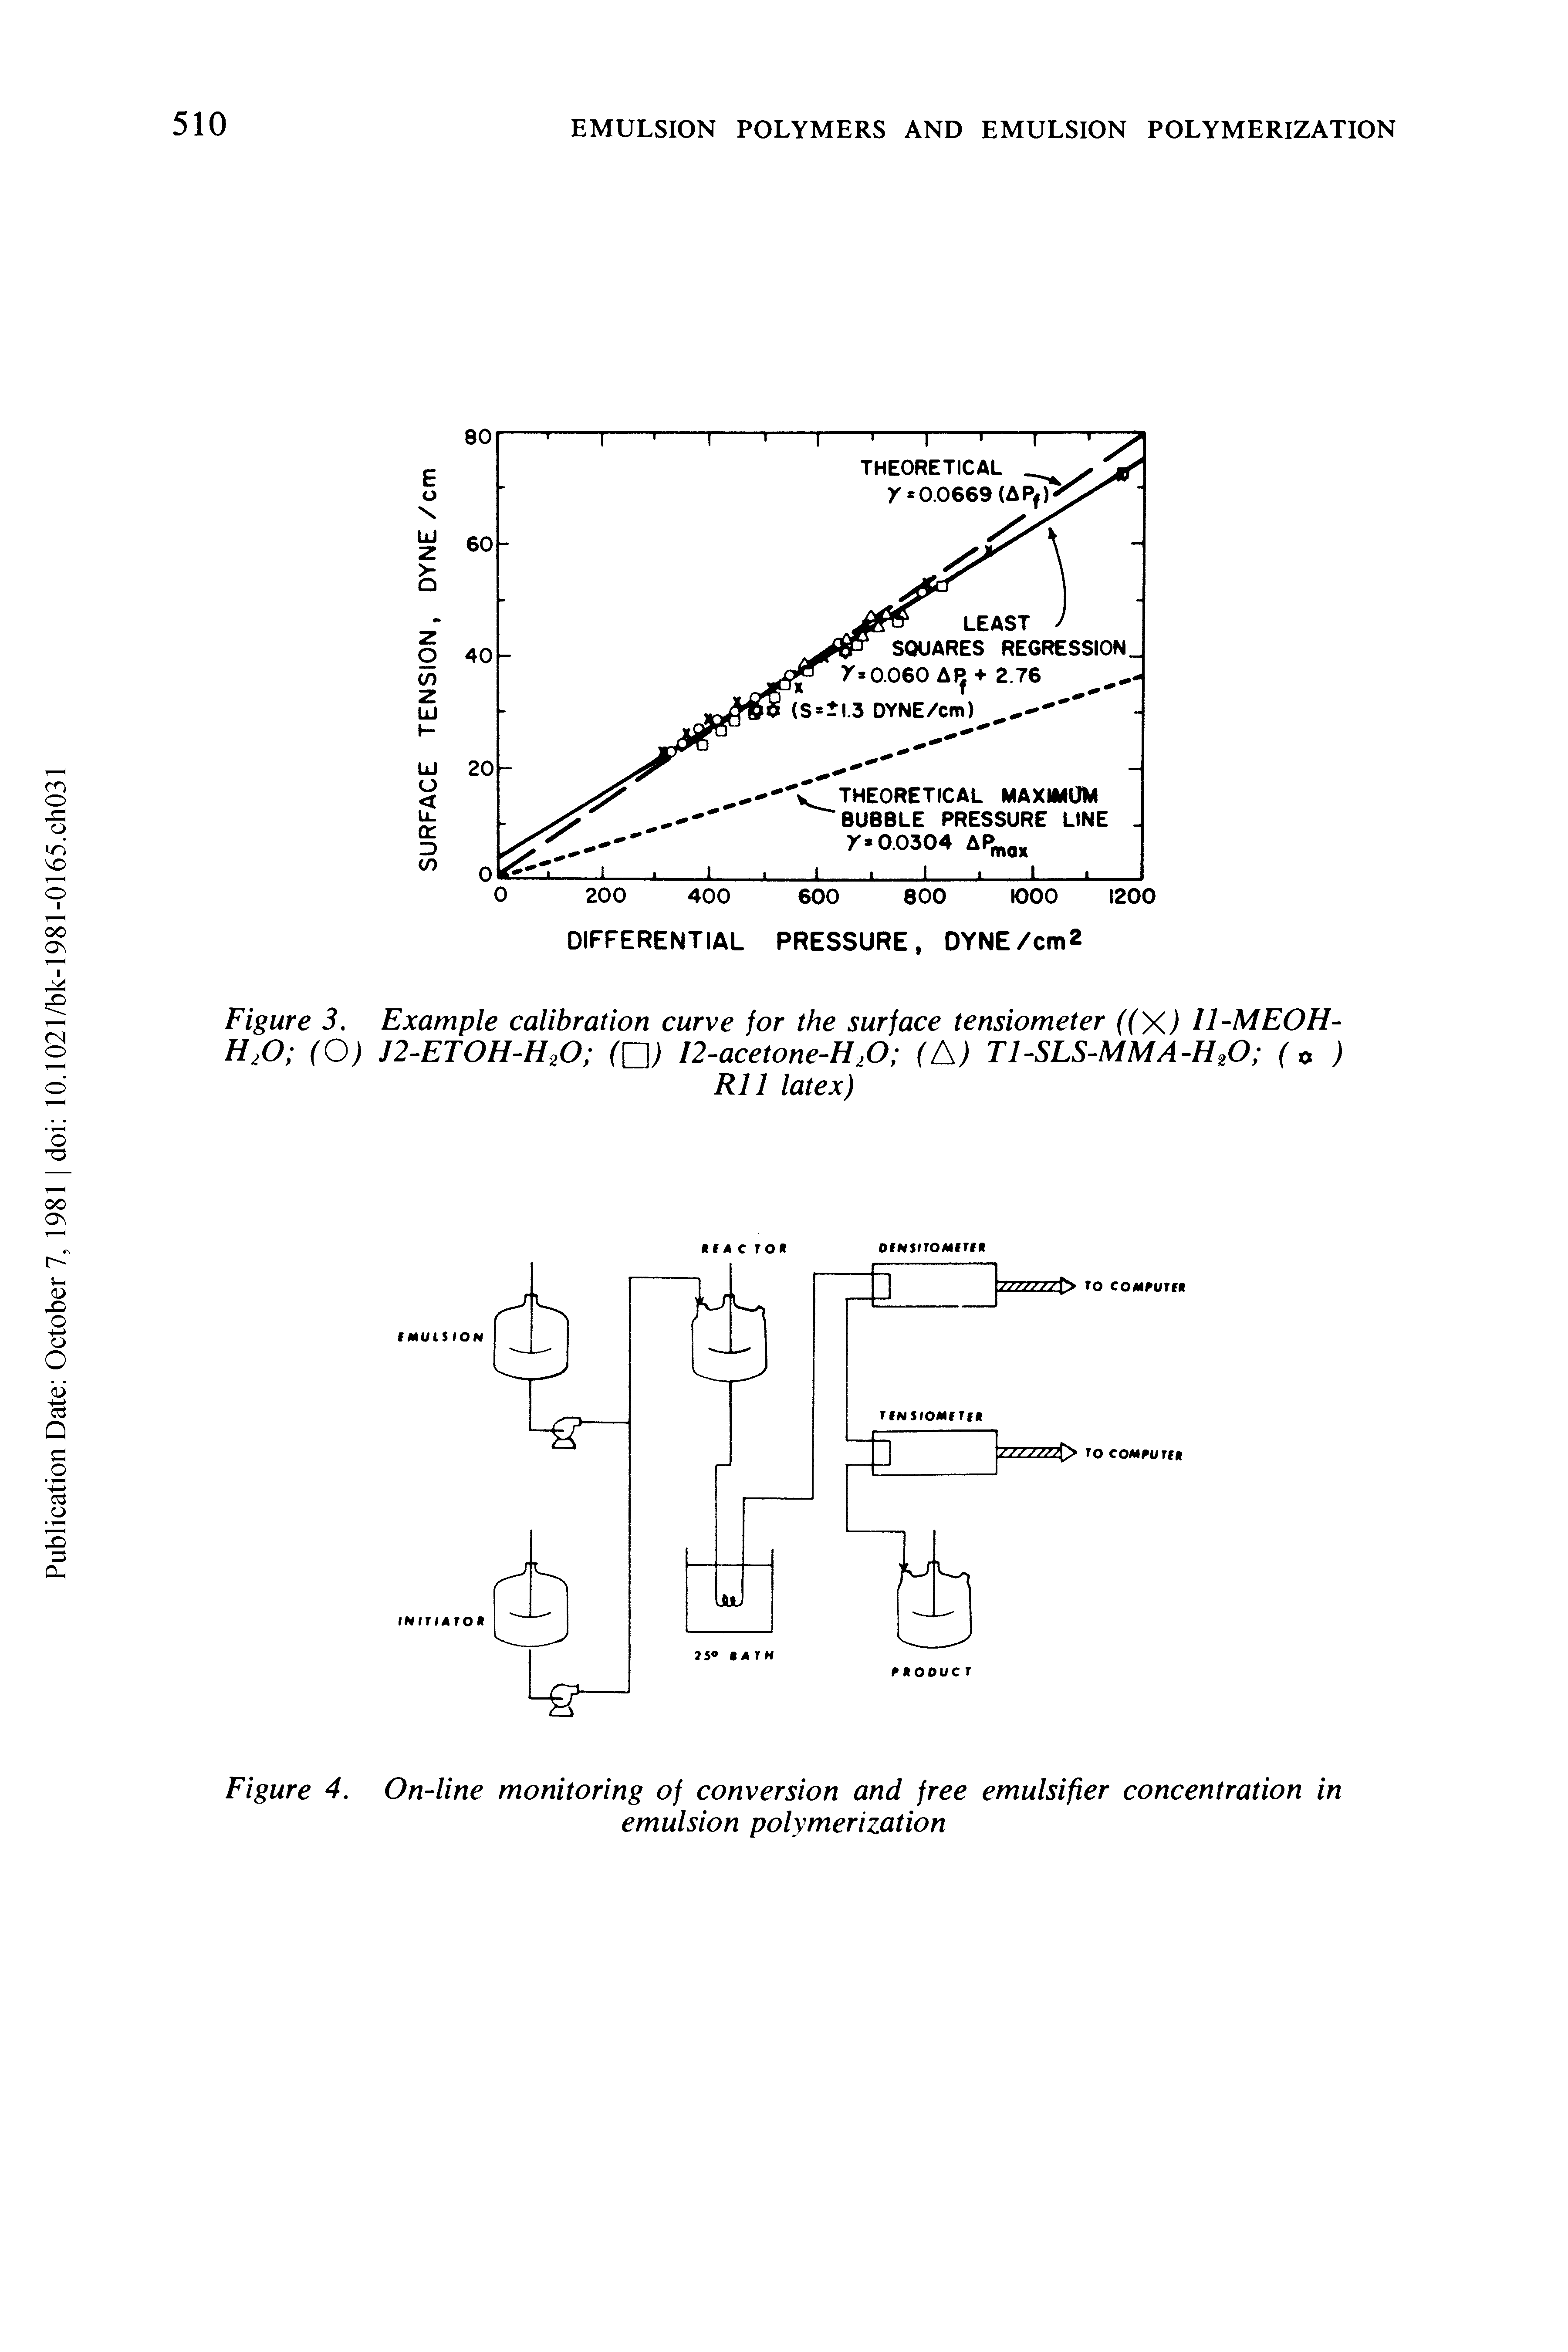 Figure 3. Example calibration curve for the surface tensiometer ((X) Il-MEOH-H20 (O) J2-ET0H-H20 O 12-acetone-H,0 (A) T1-SLS-MMA-H20 (xx )...